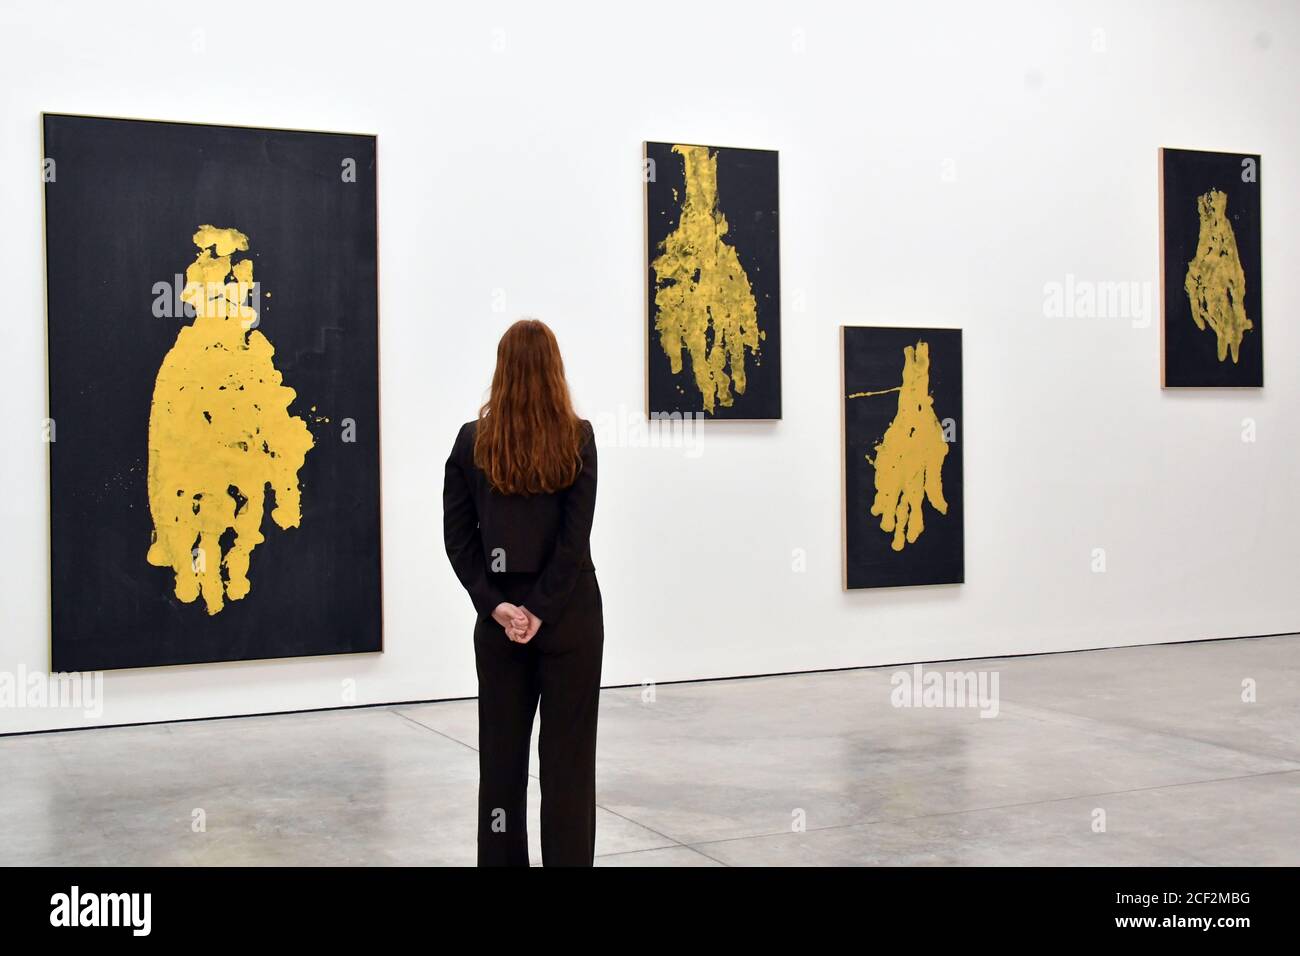 London, UK - 3 September 2020 Preview of ÔDarkness GoldnessÕ, a solo exhibition by Georg Baselitz at White Cube Mason's Yard consisting of new paintings featuring mysterious, ghostly hands rendered in gold, alongside related drawings and fire-gilded bronze reliefs, the artistÕs first sculptural works in almost a decade. (L-R) Manodopera C ArbeitskrŠfte, 2019, Per mano C an der Hand, 2019, Mano sola, 2019, Maniluvio, 2019,    Credit: Nils Jorgensen/Alamy Live News Stock Photo